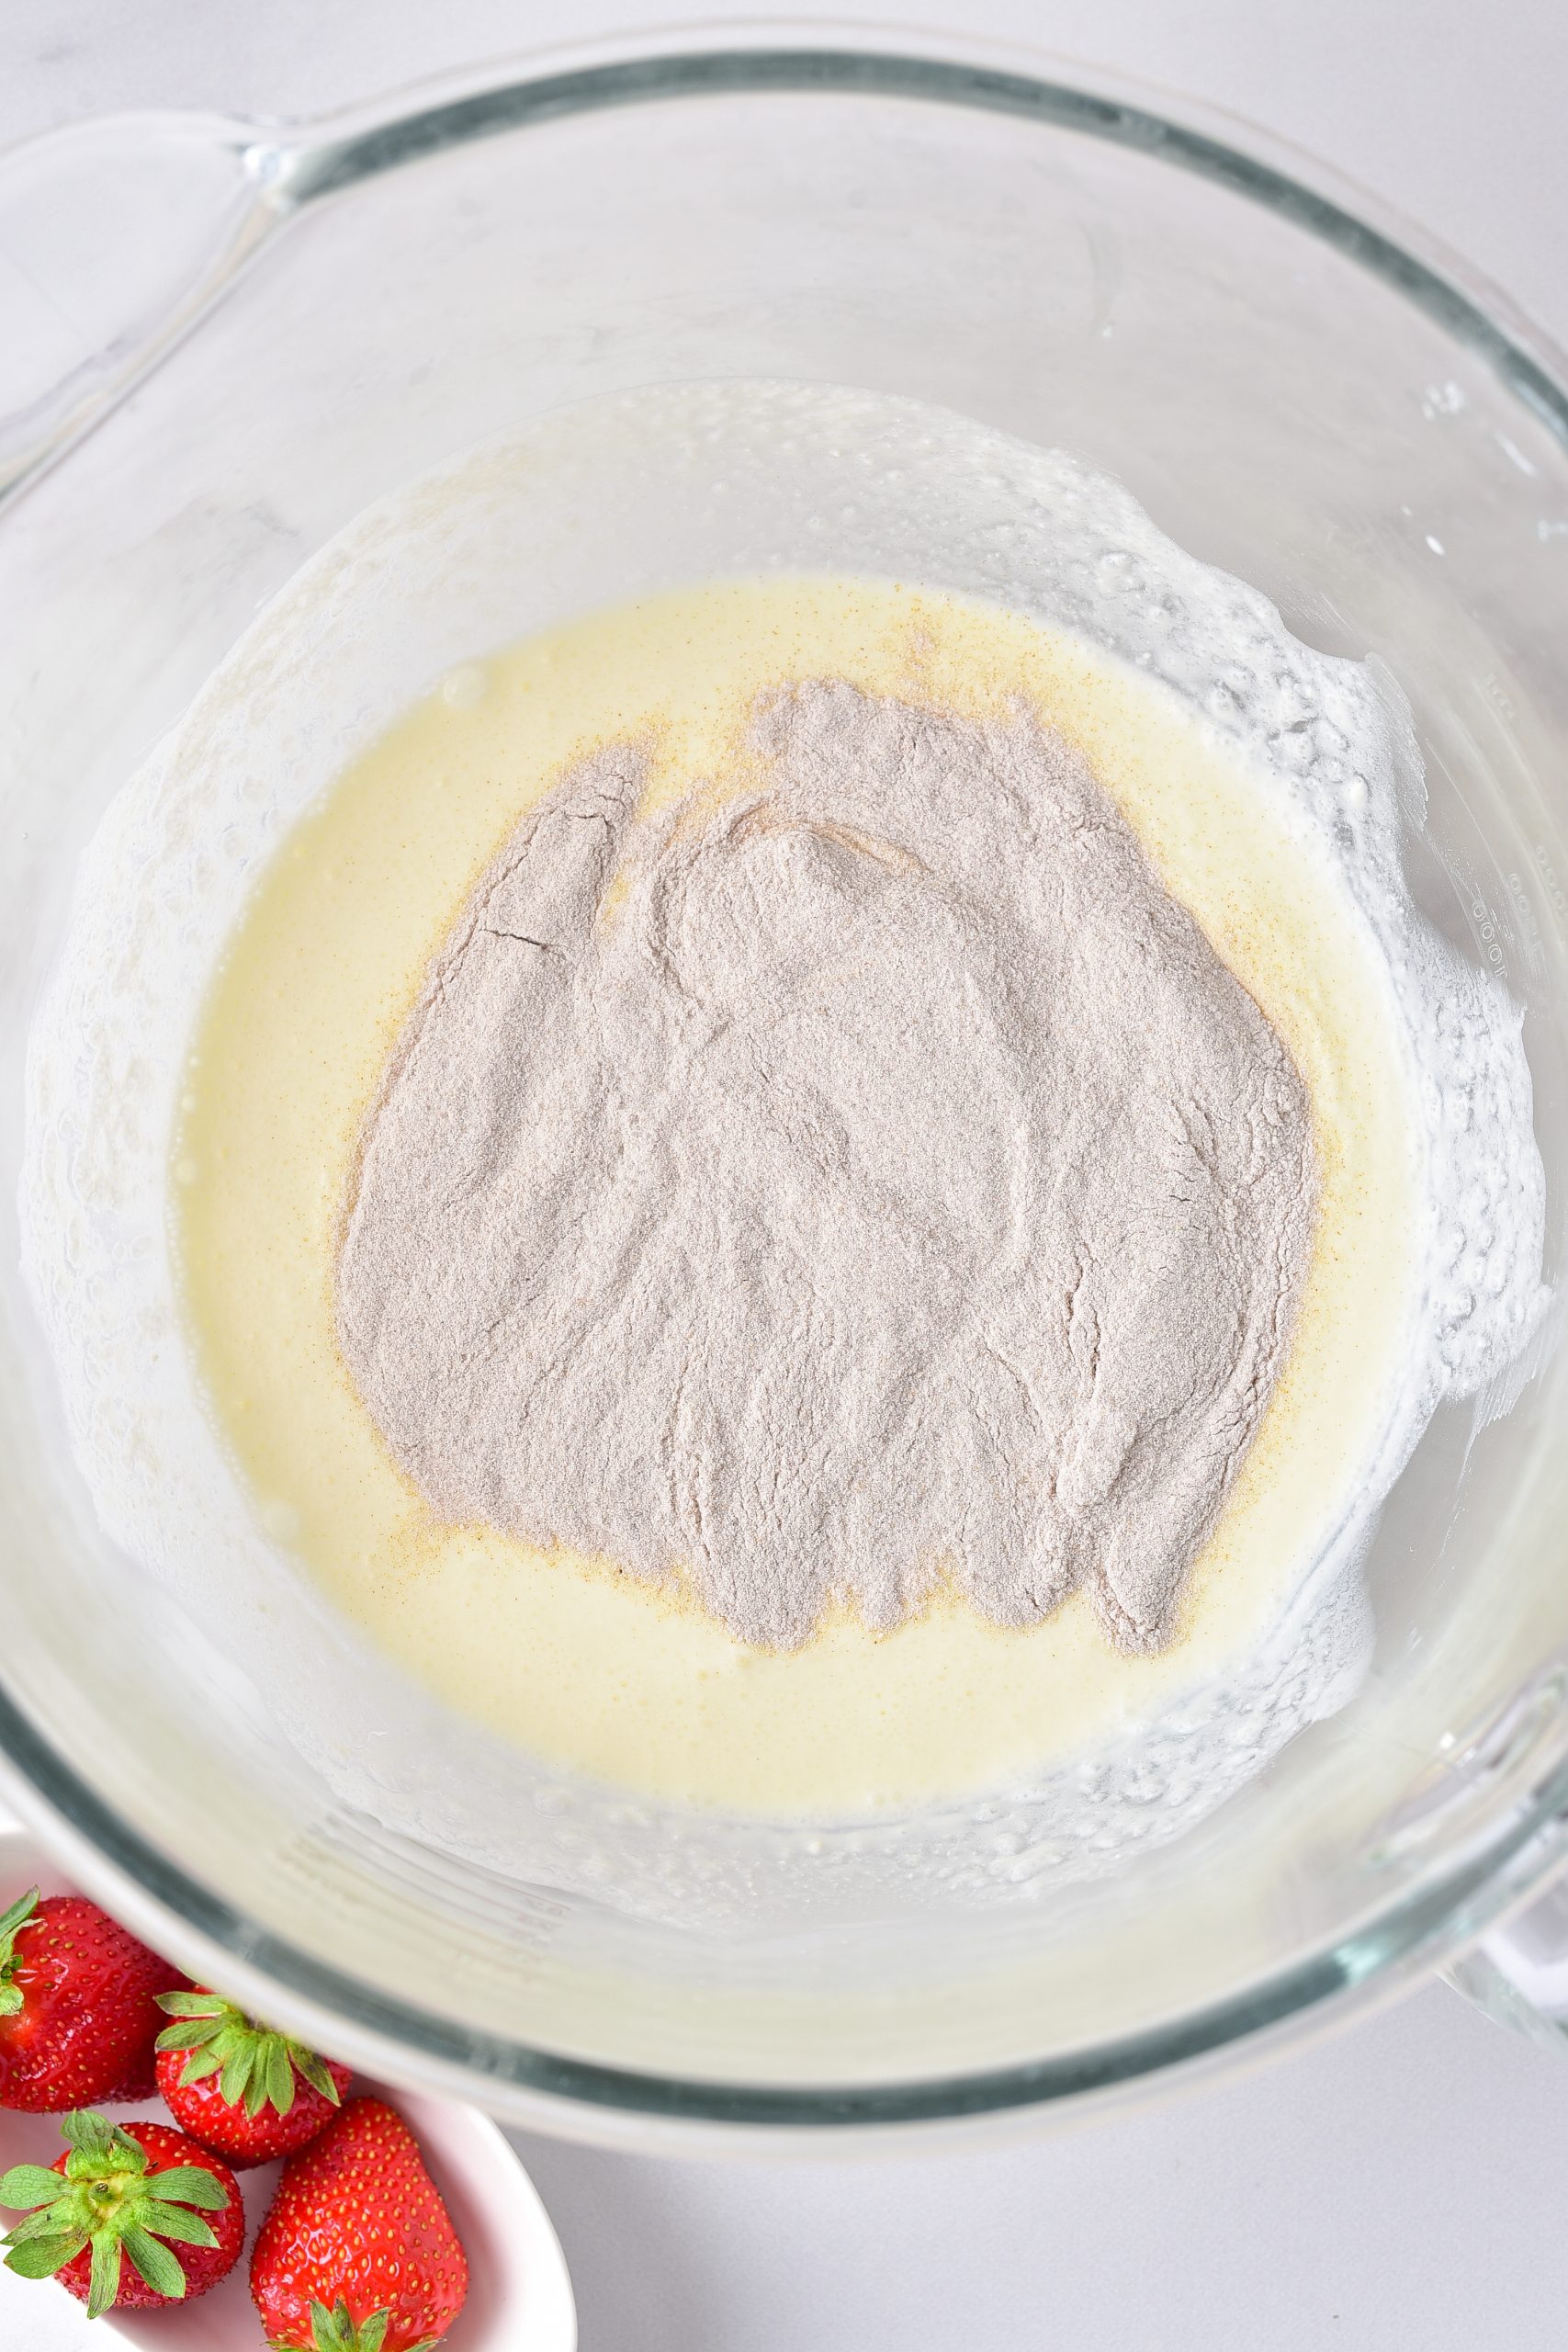 Beat in the milk, and then add the pudding.